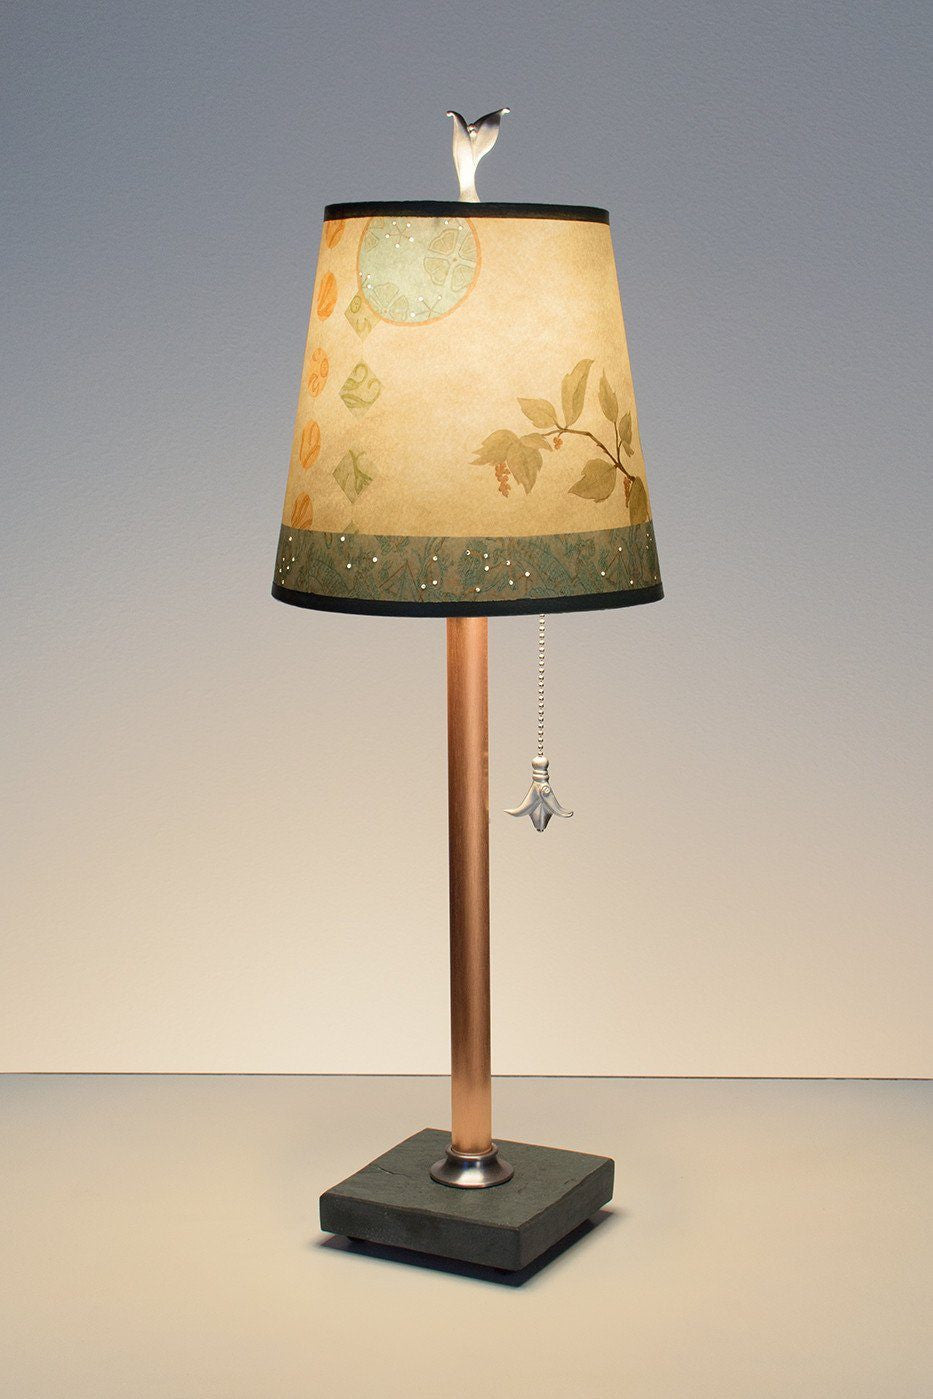 Janna Ugone &amp; Co Table Lamps Copper Table Lamp with Small Drum Shade in Celestial Leaf